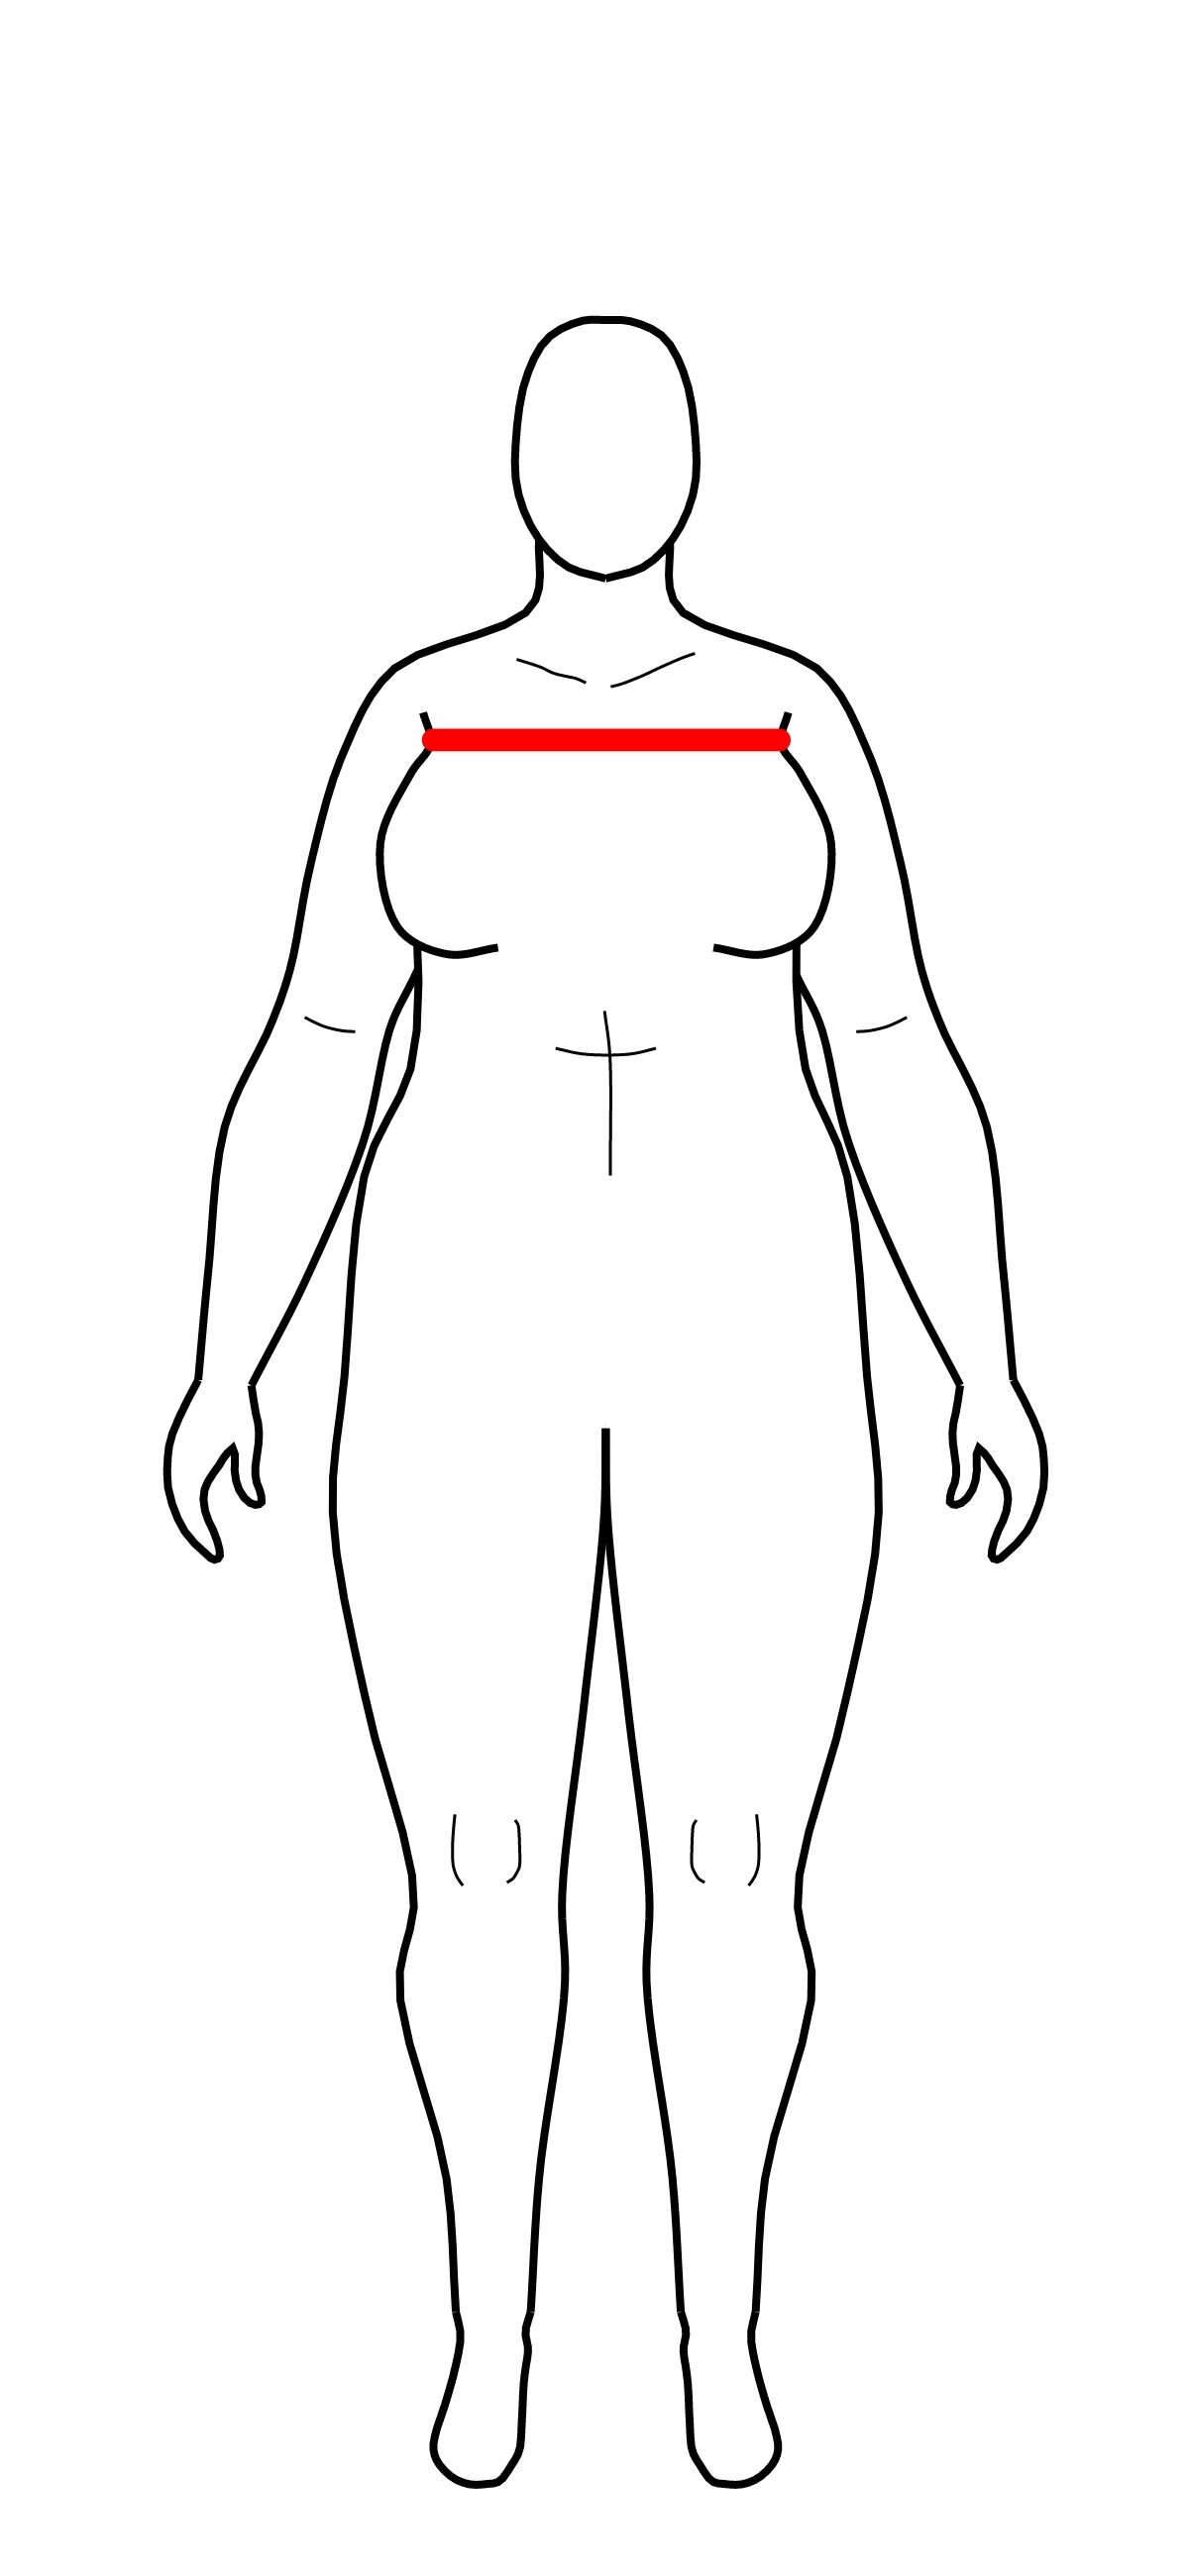 Upper chest circumference with bra (Copy)